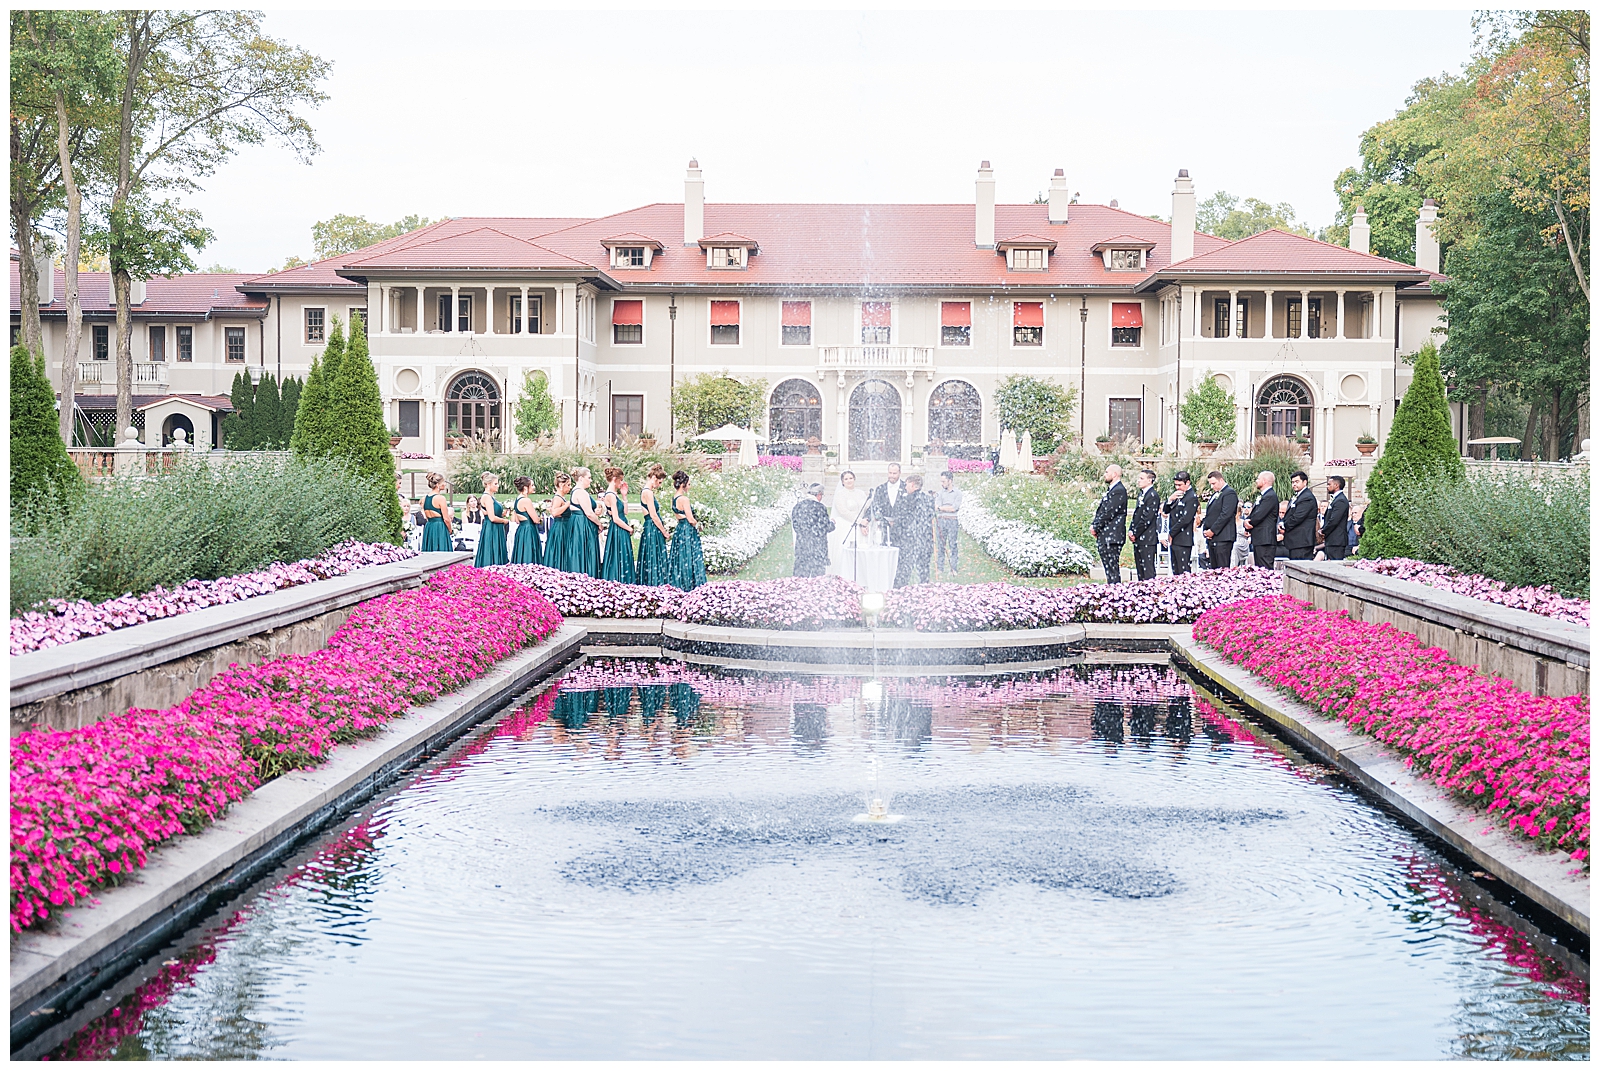 Wedding Photography at The Armour House at Lake Forest Academy